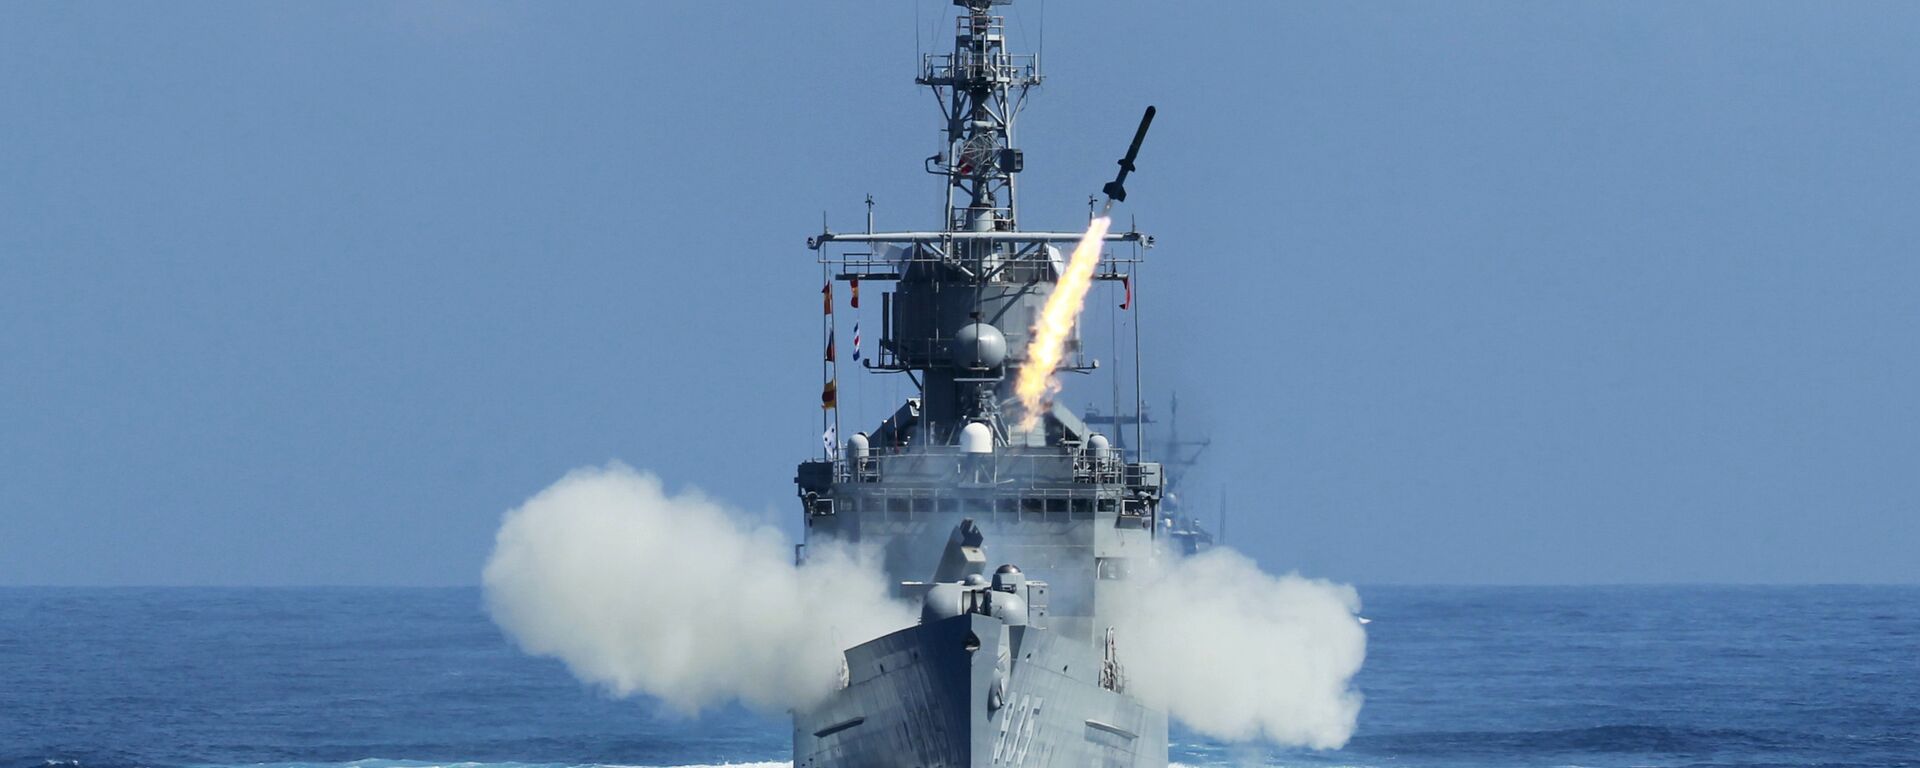 Taiwan Navy's Perry-class frigate launches an ASROC (anti-submarine rocket) during the annual Han Kuang military exercises. - Sputnik International, 1920, 11.04.2021